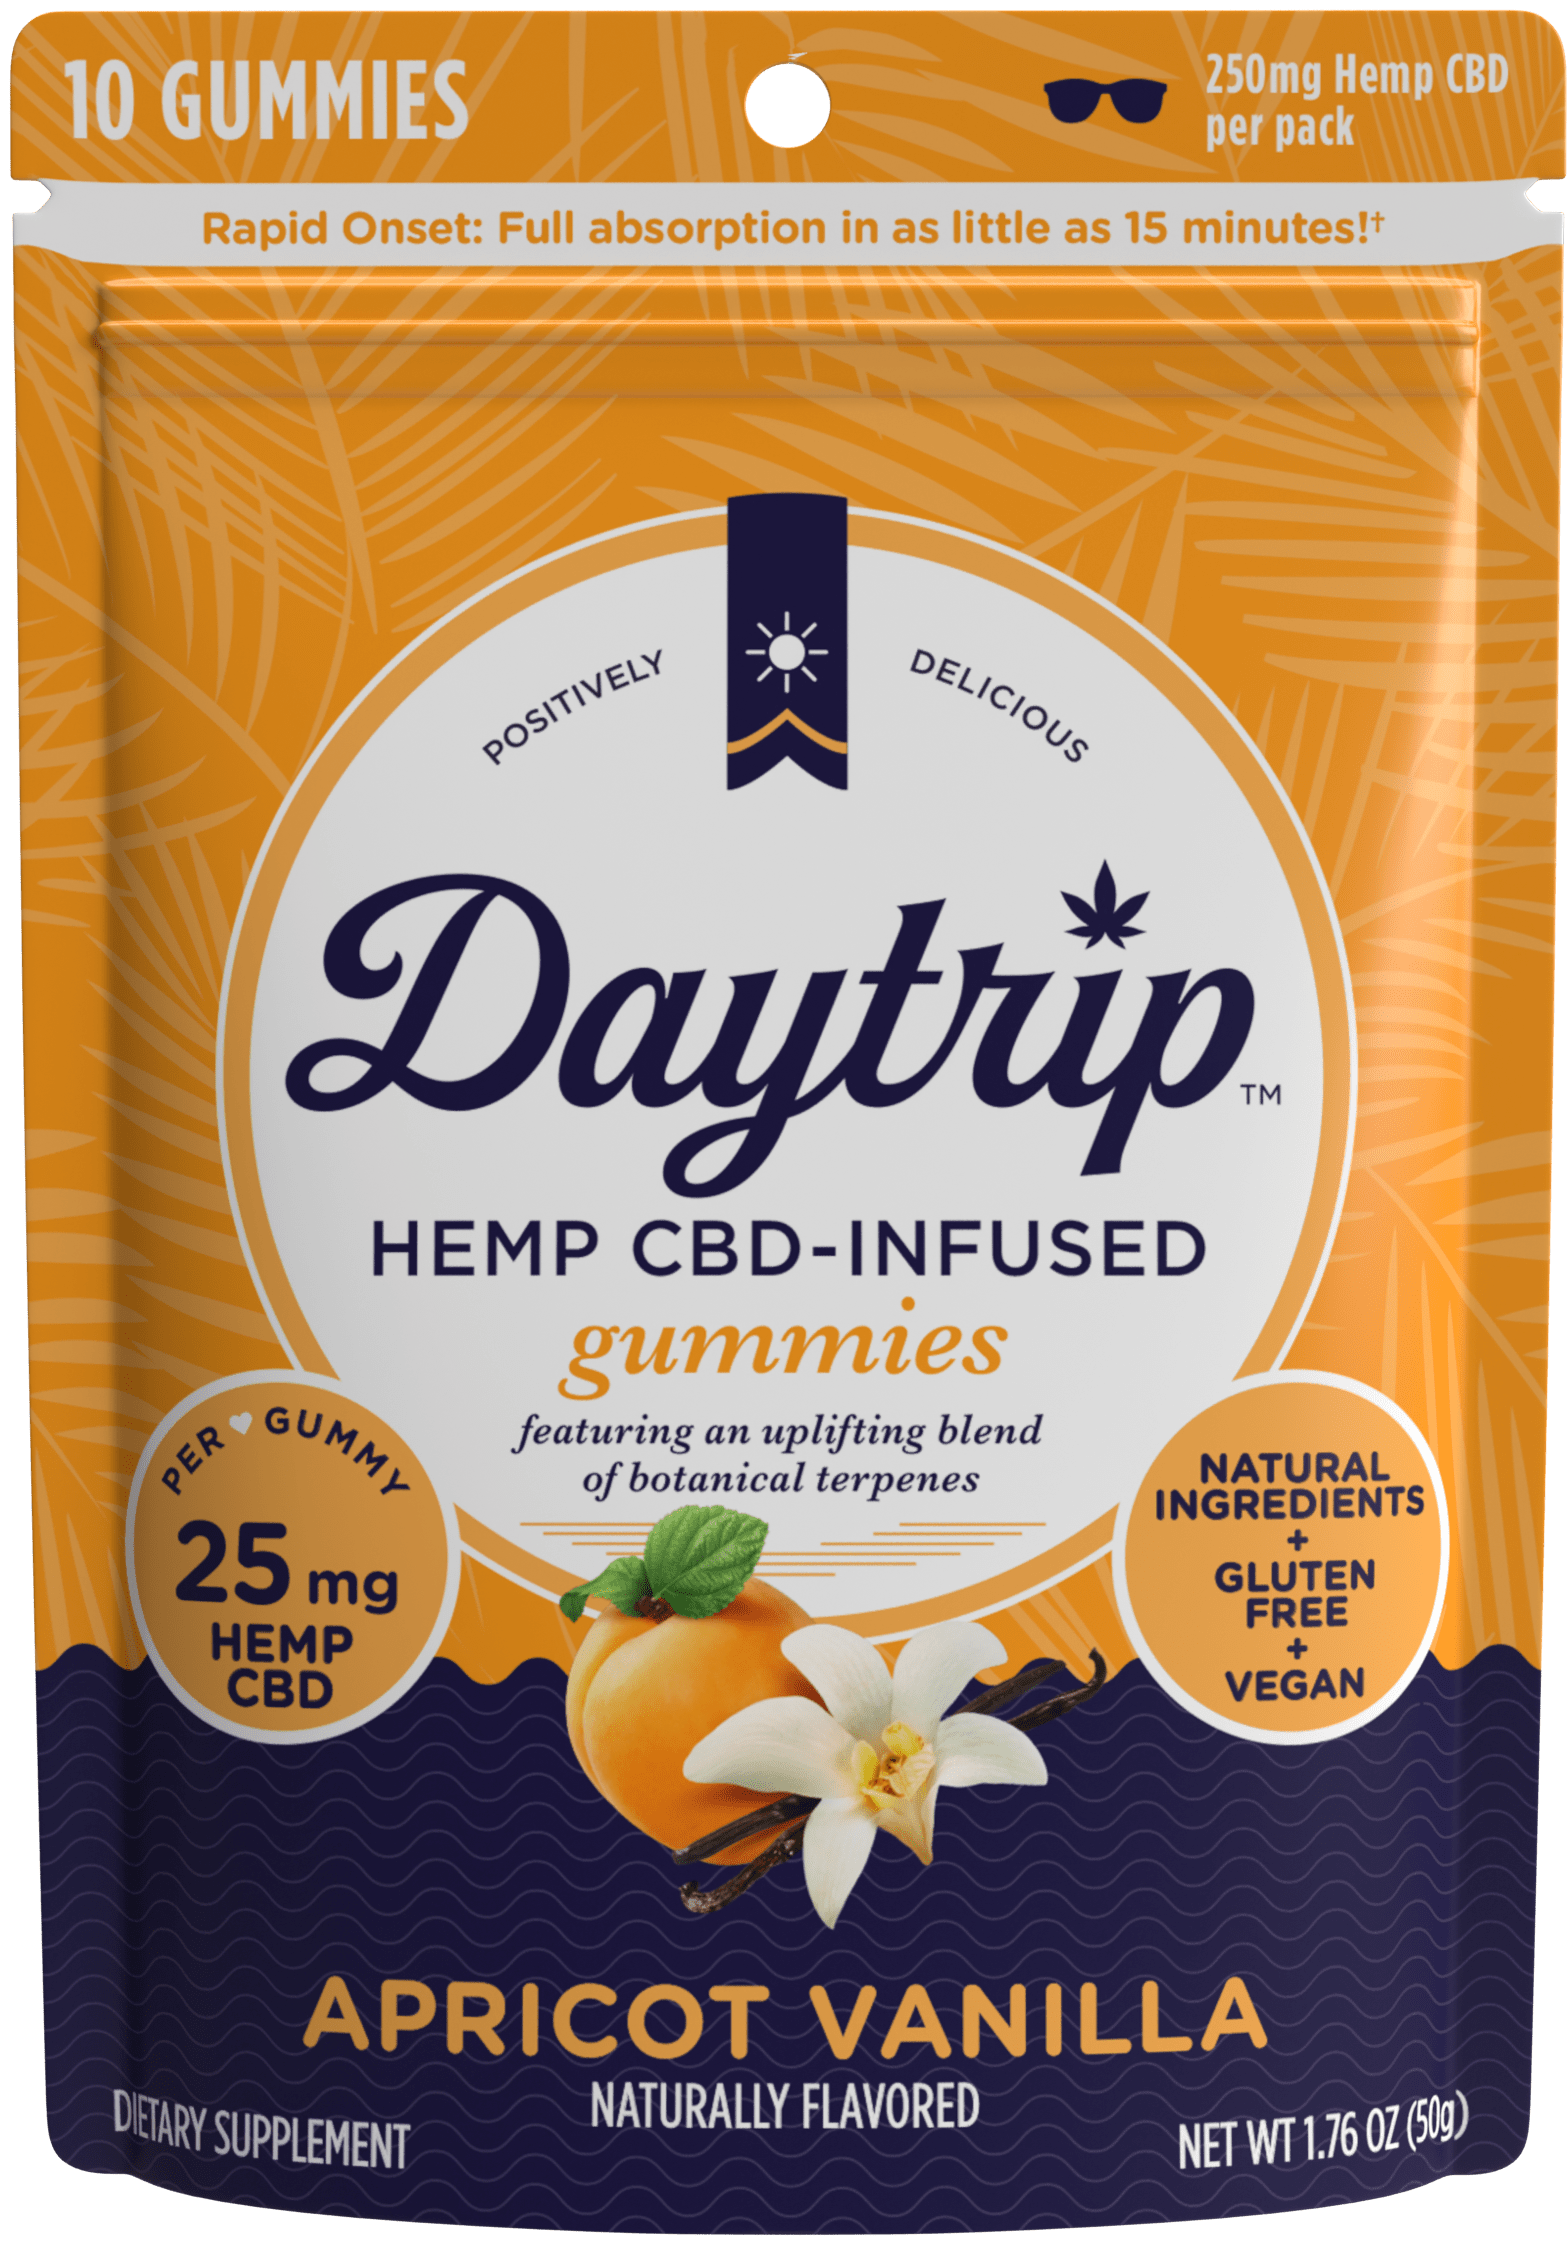 Package front render of Daytrip apricot vanilla CBD-infused gummies.